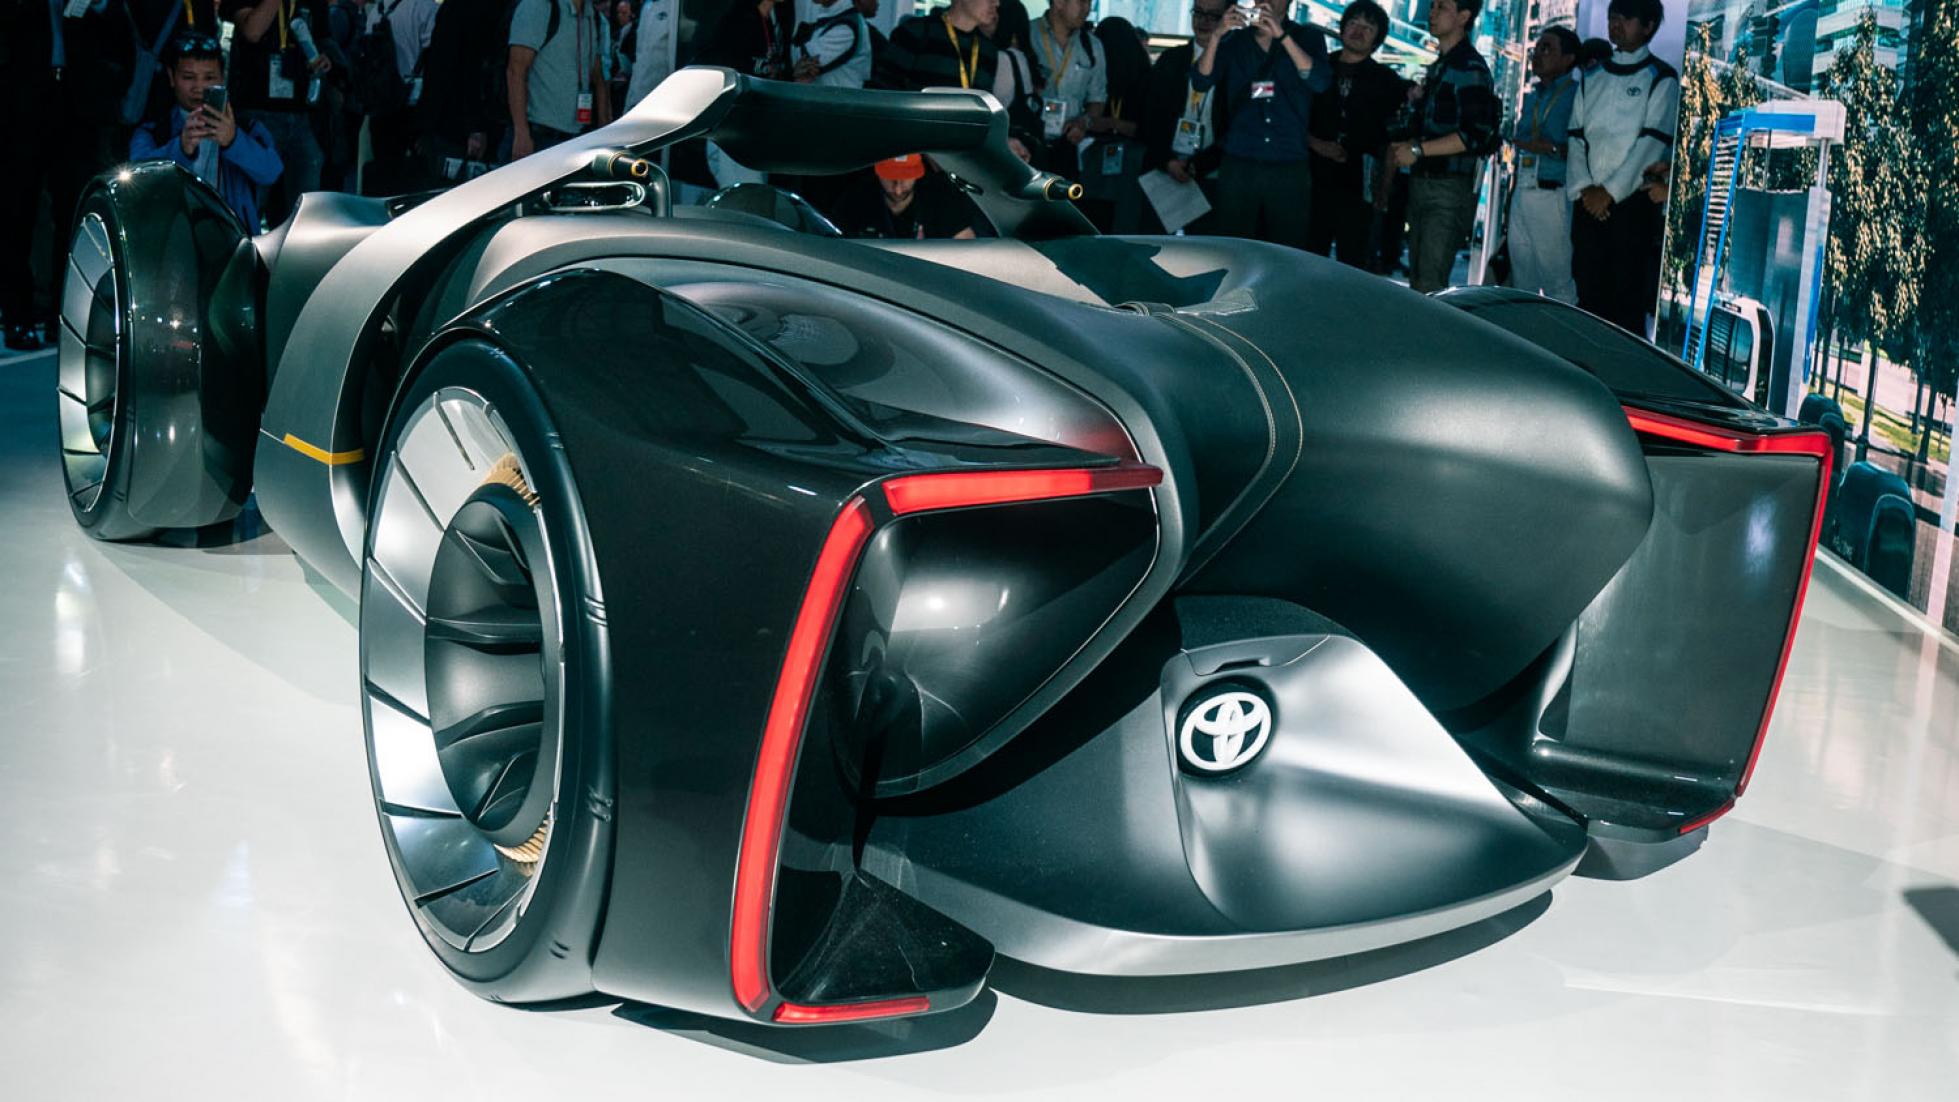 Toyota’s wild two-seater e-racer is a “racehorse” of the future